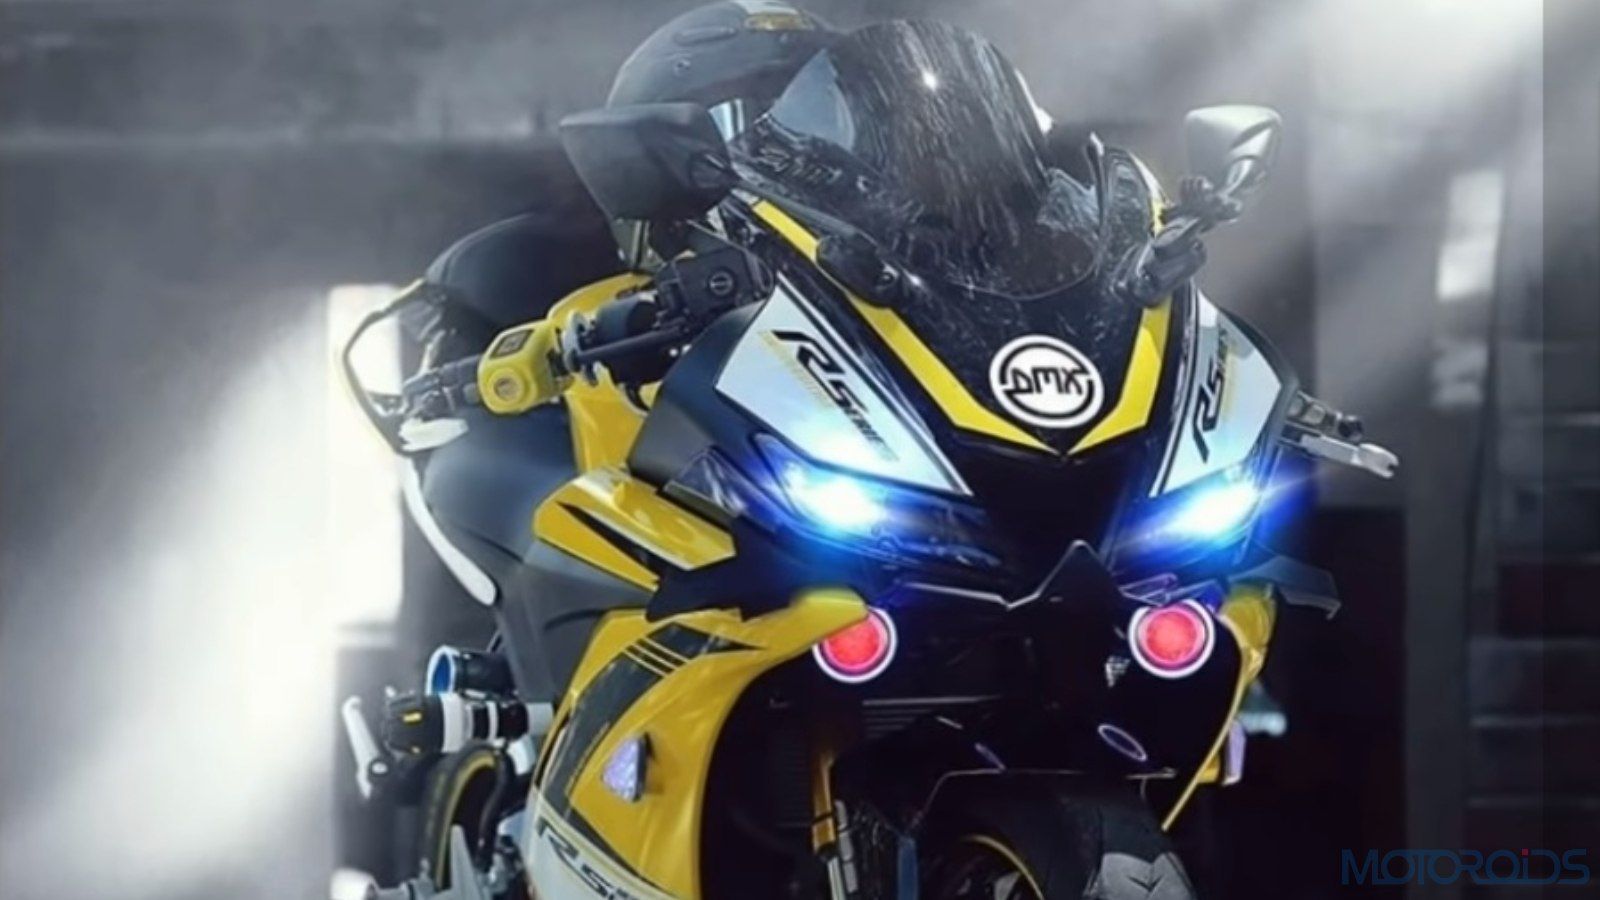 This Modified Yamaha R15 Has Been Stung By A Bee